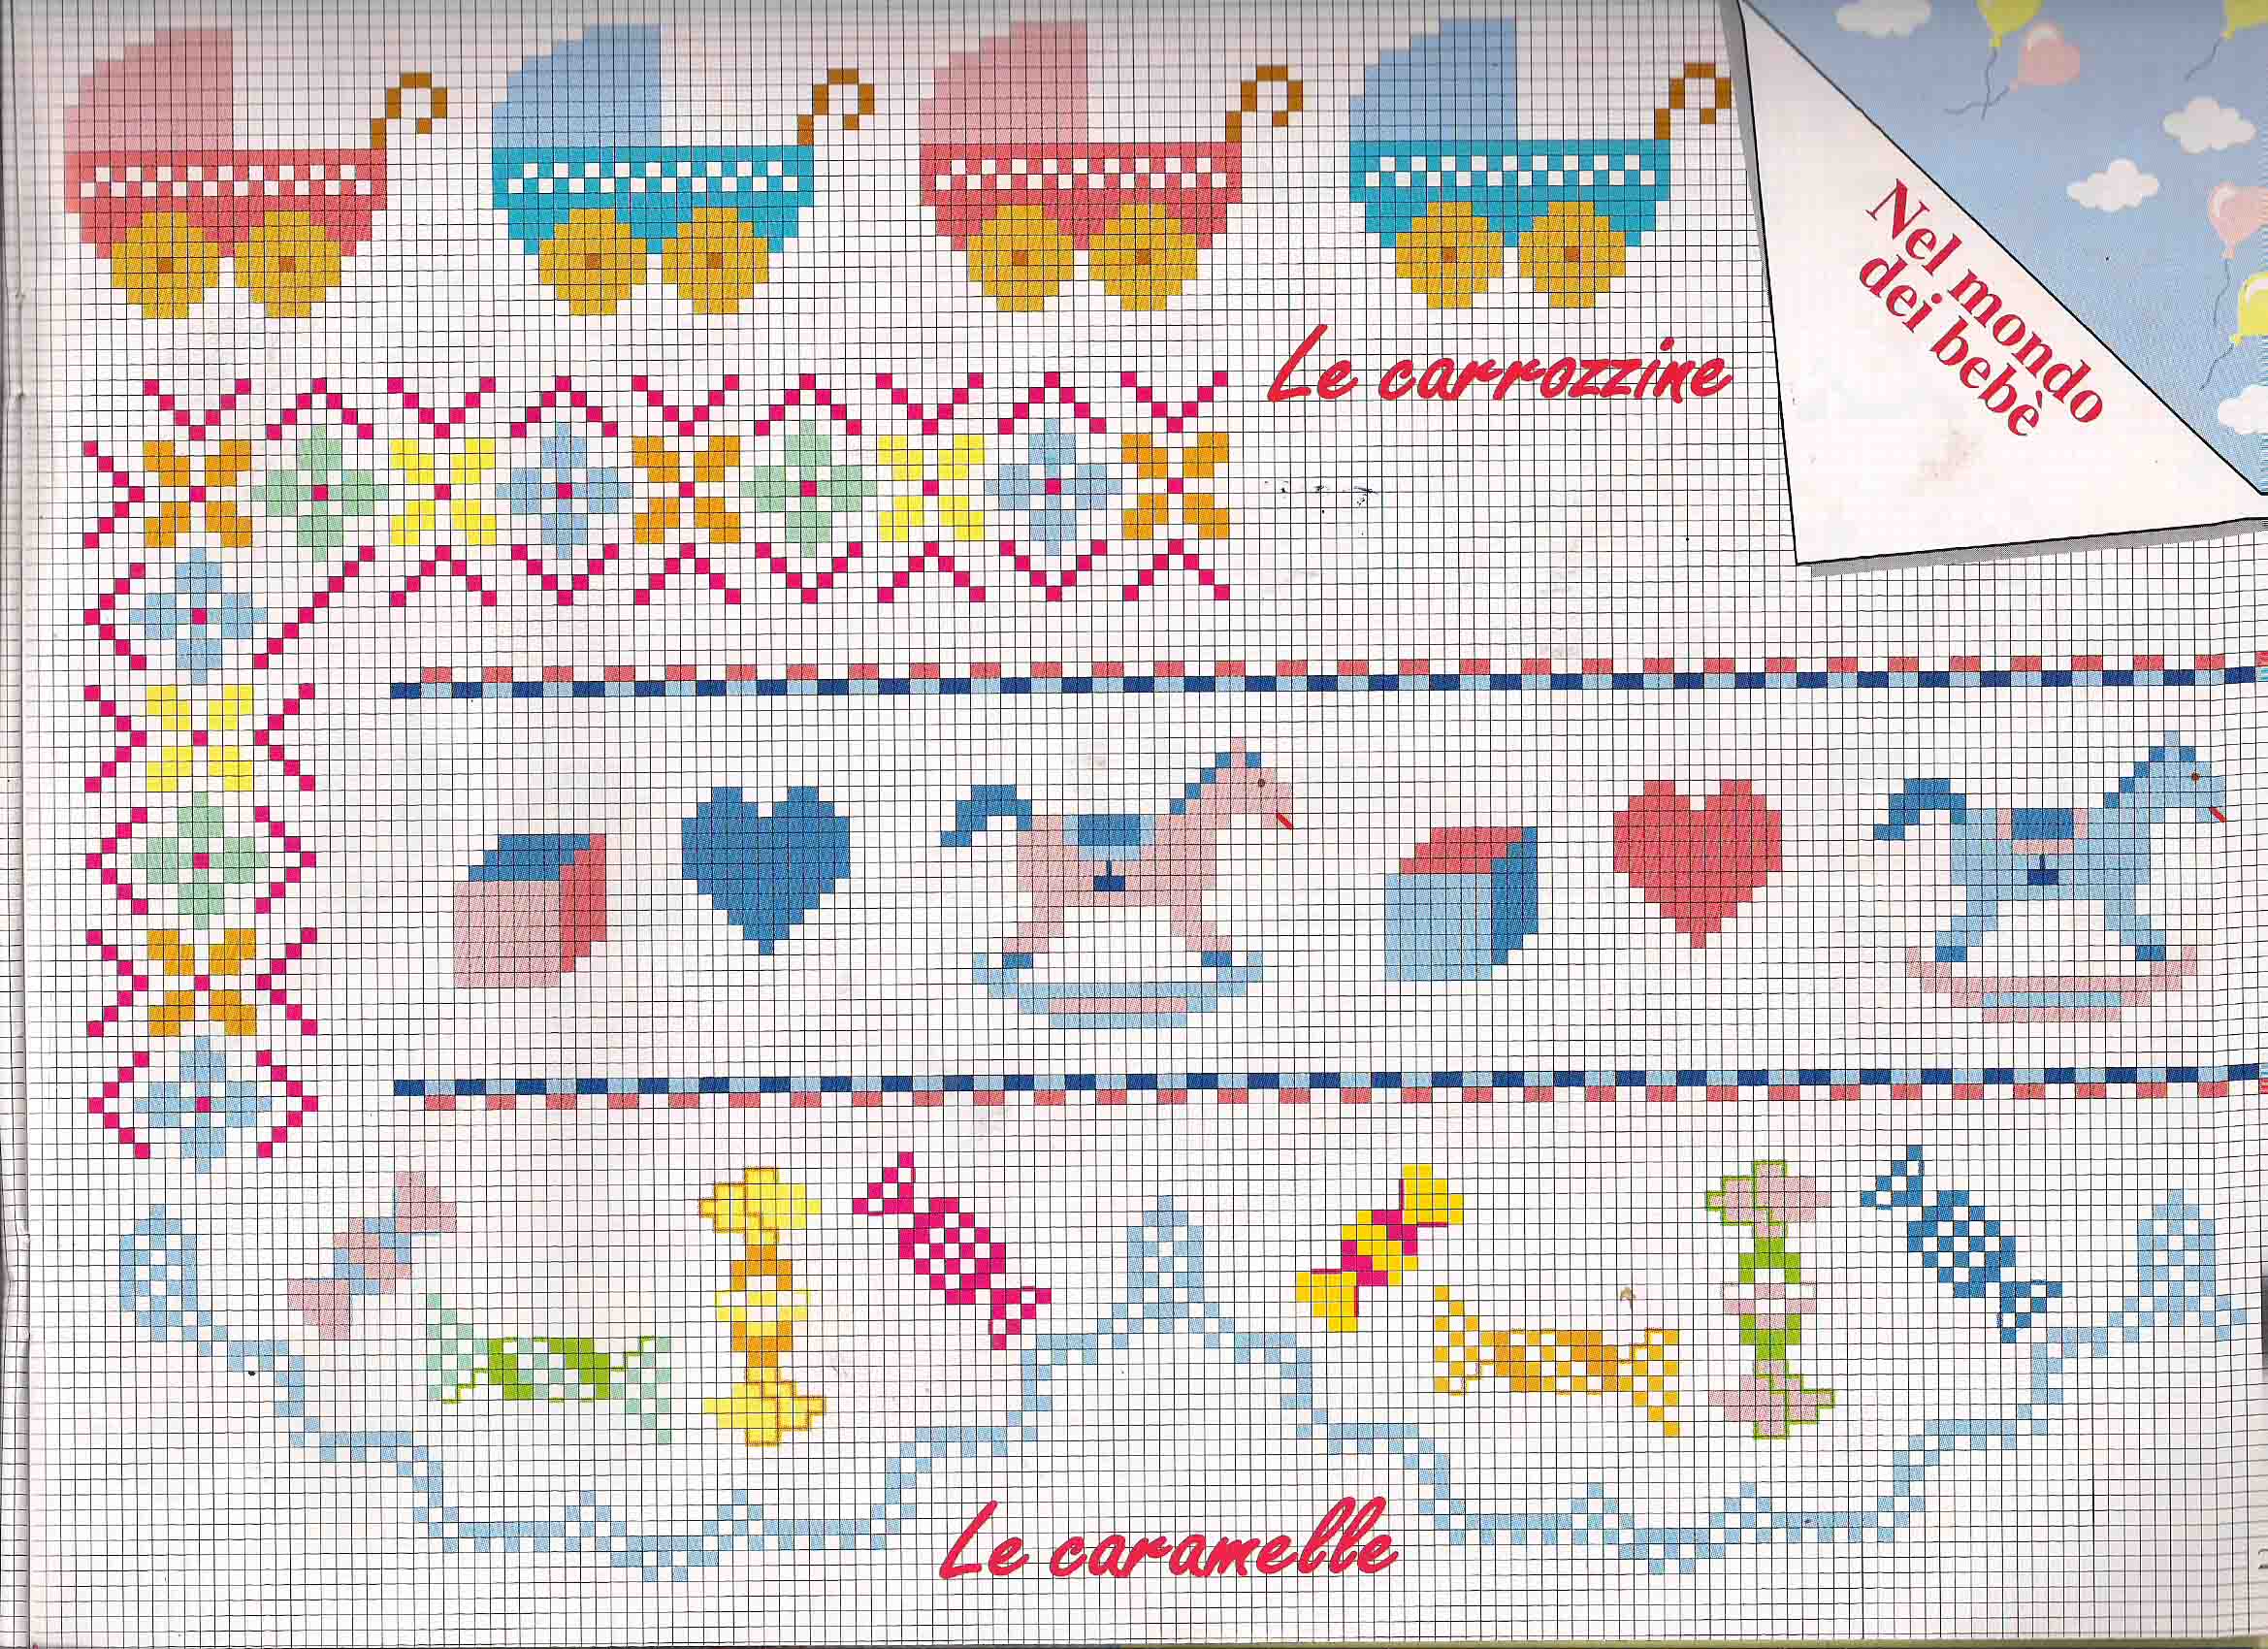 Cross stitch borders with baby carriages and rocking horses